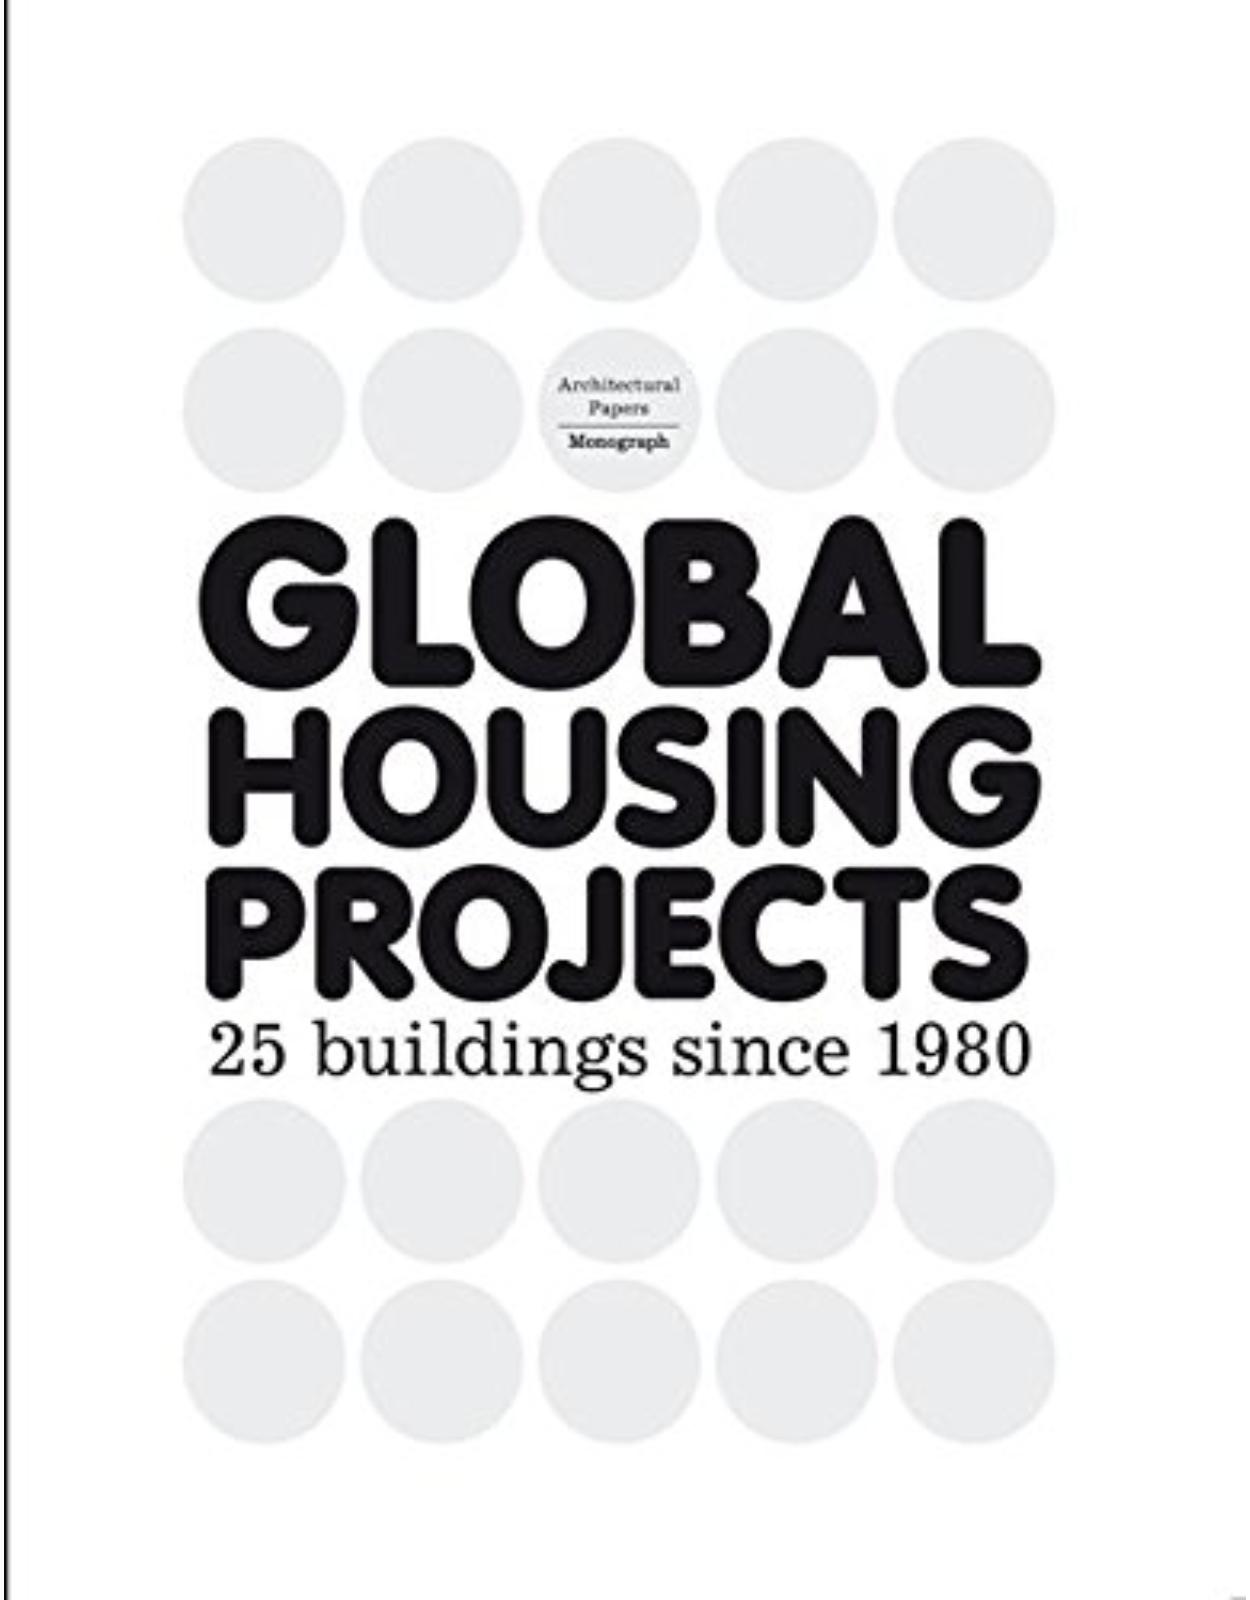 Global Housing Projects - 25 buildings since 1980 (Architectural Papers)